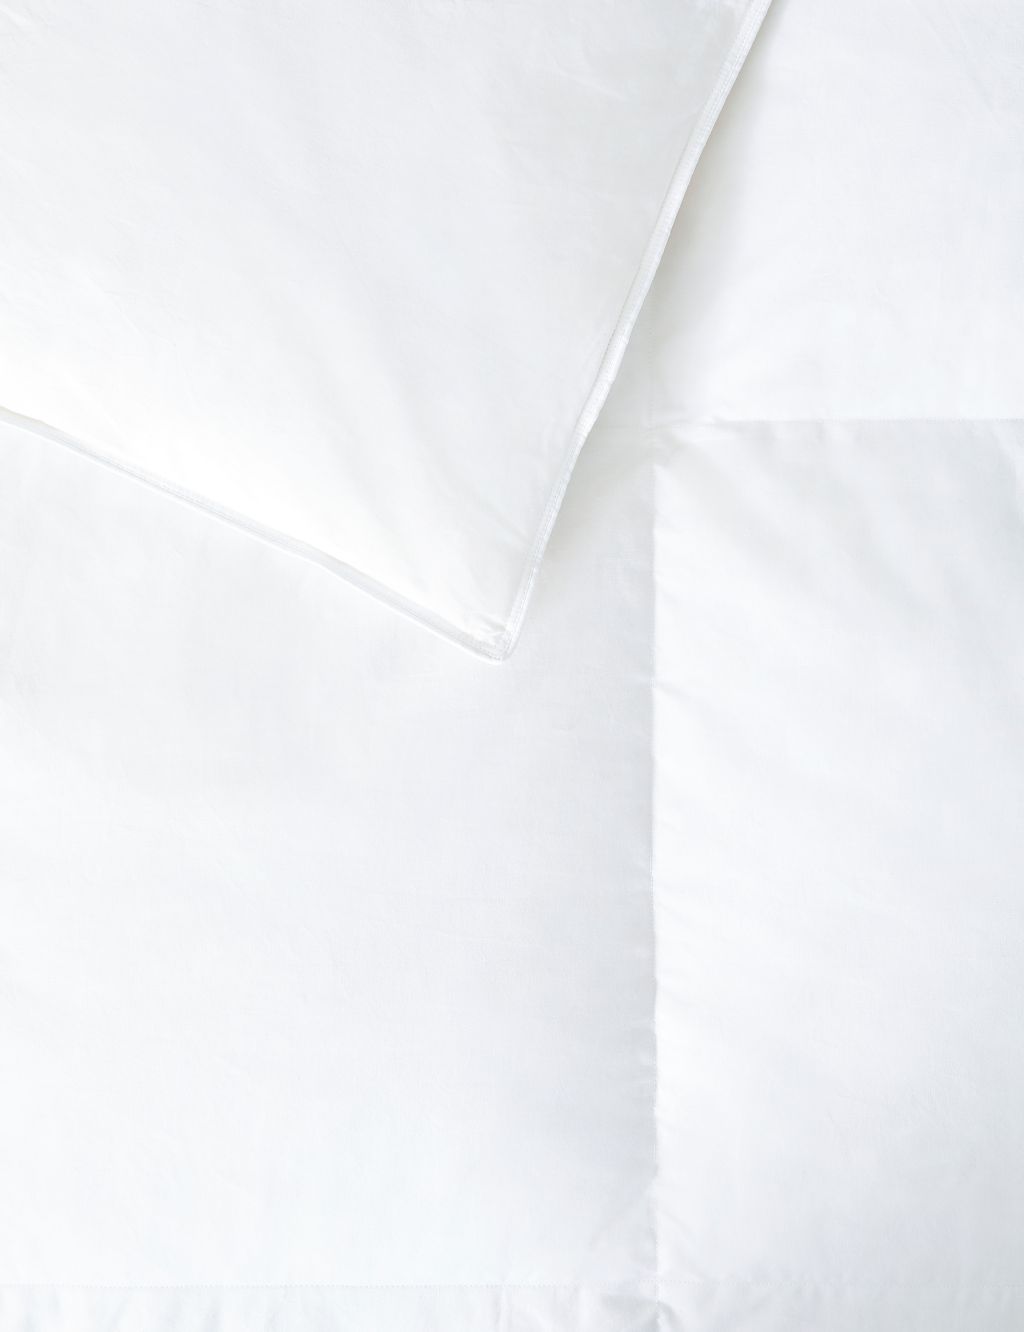 Duck Feather & Down 10.5 Tog Duvet image 3